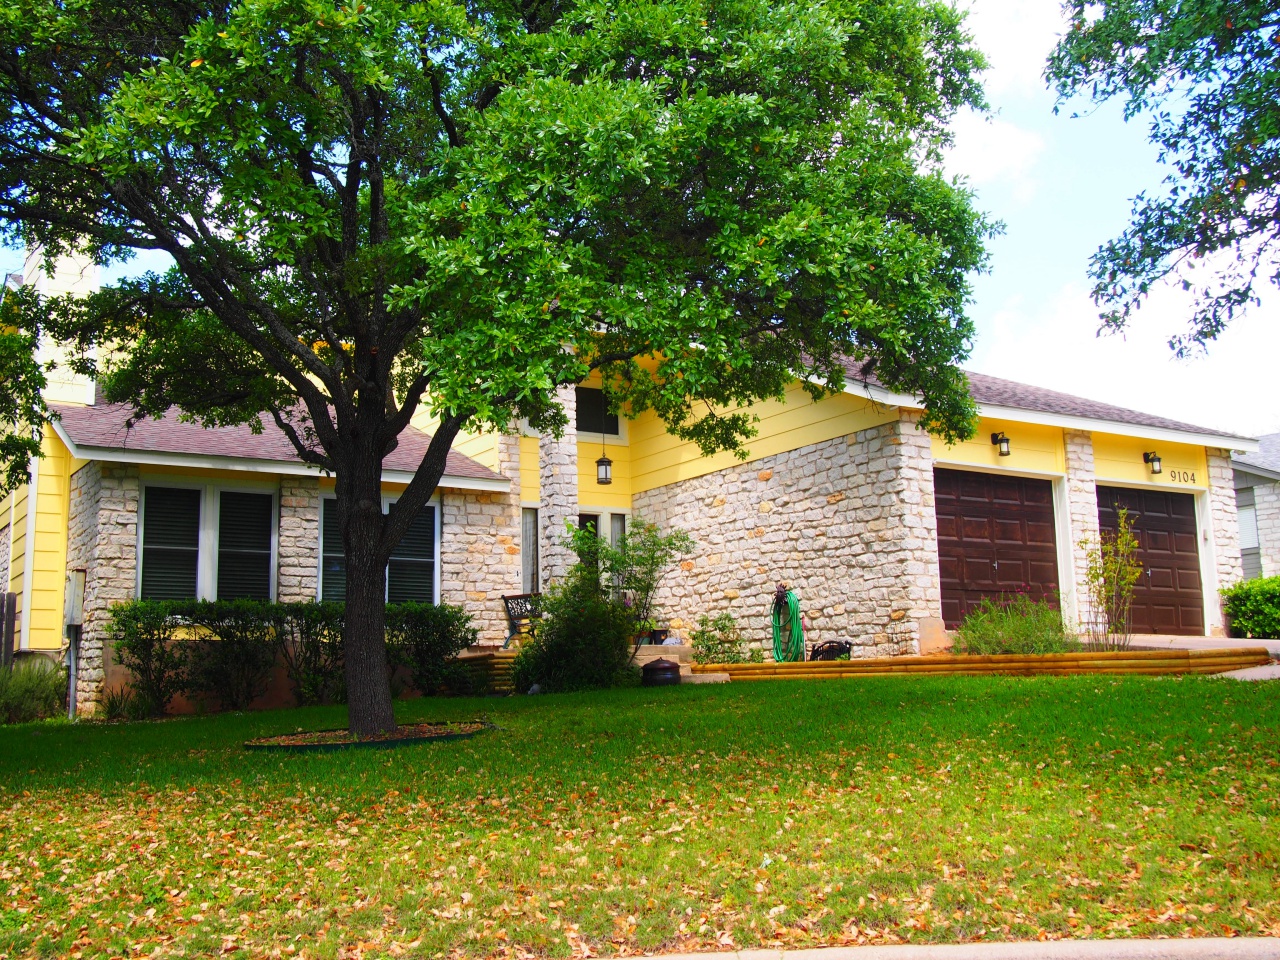 Austin neighborhoods with the best schools $800k_41MM park at spicewood springs